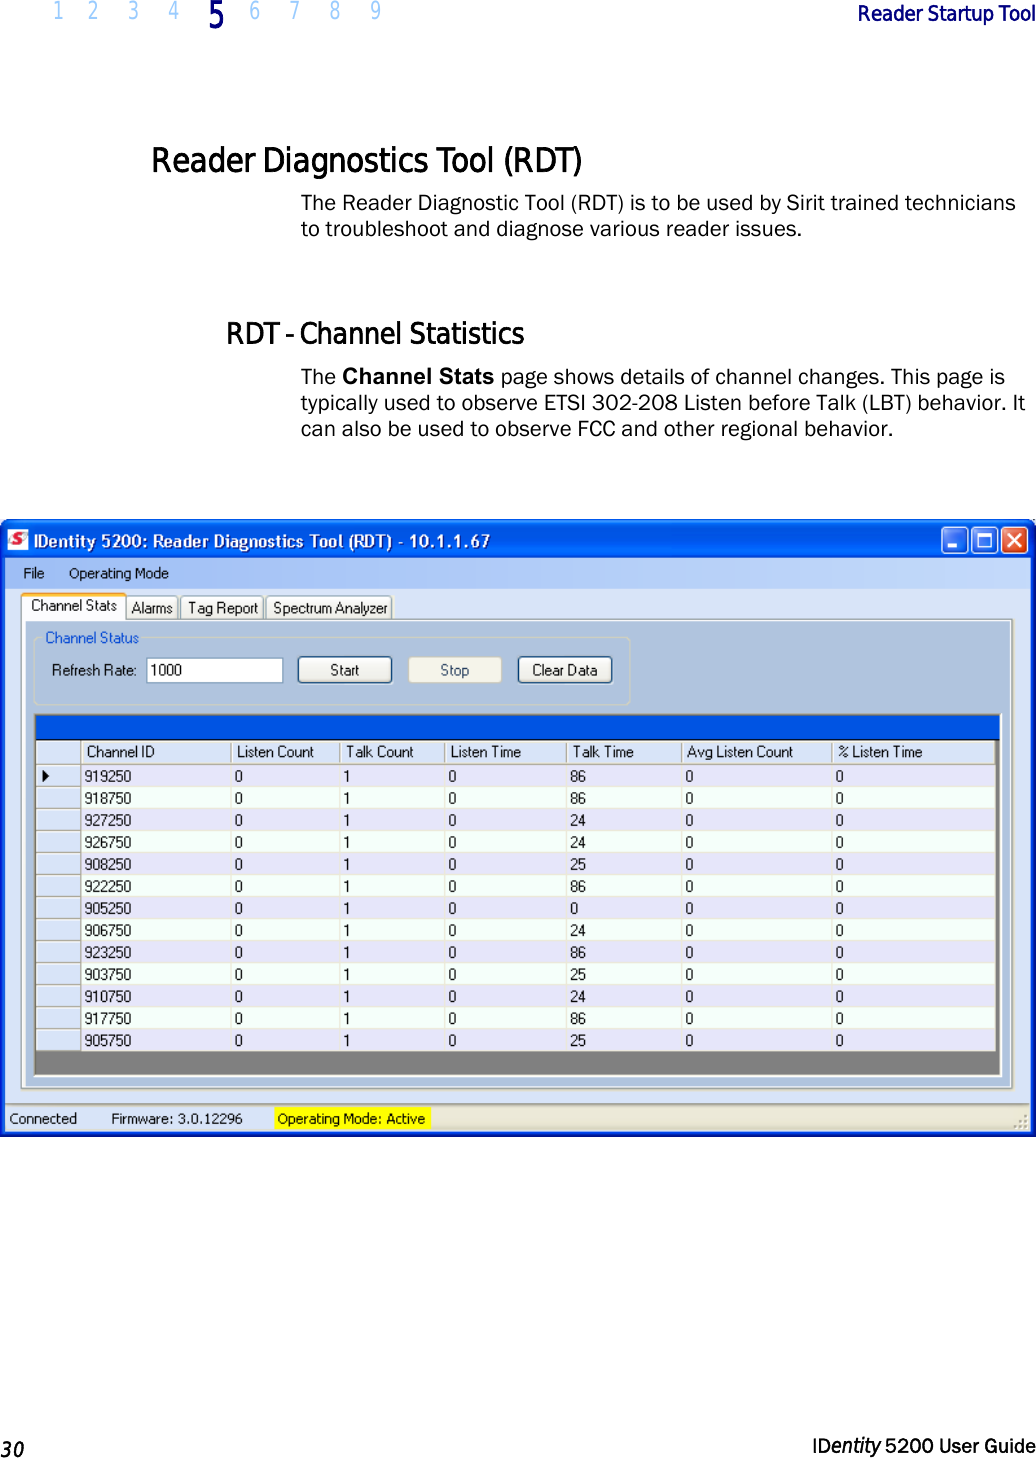  1 2  3  4 5 6 7 8 9       Reader Startup Tool   30  IDentity 5200 User Guide  Reader Diagnostics Tool (RDT) The Reader Diagnostic Tool (RDT) is to be used by Sirit trained technicians to troubleshoot and diagnose various reader issues.   RDT - Channel Statistics The Channel Stats page shows details of channel changes. This page is typically used to observe ETSI 302-208 Listen before Talk (LBT) behavior. It can also be used to observe FCC and other regional behavior.    